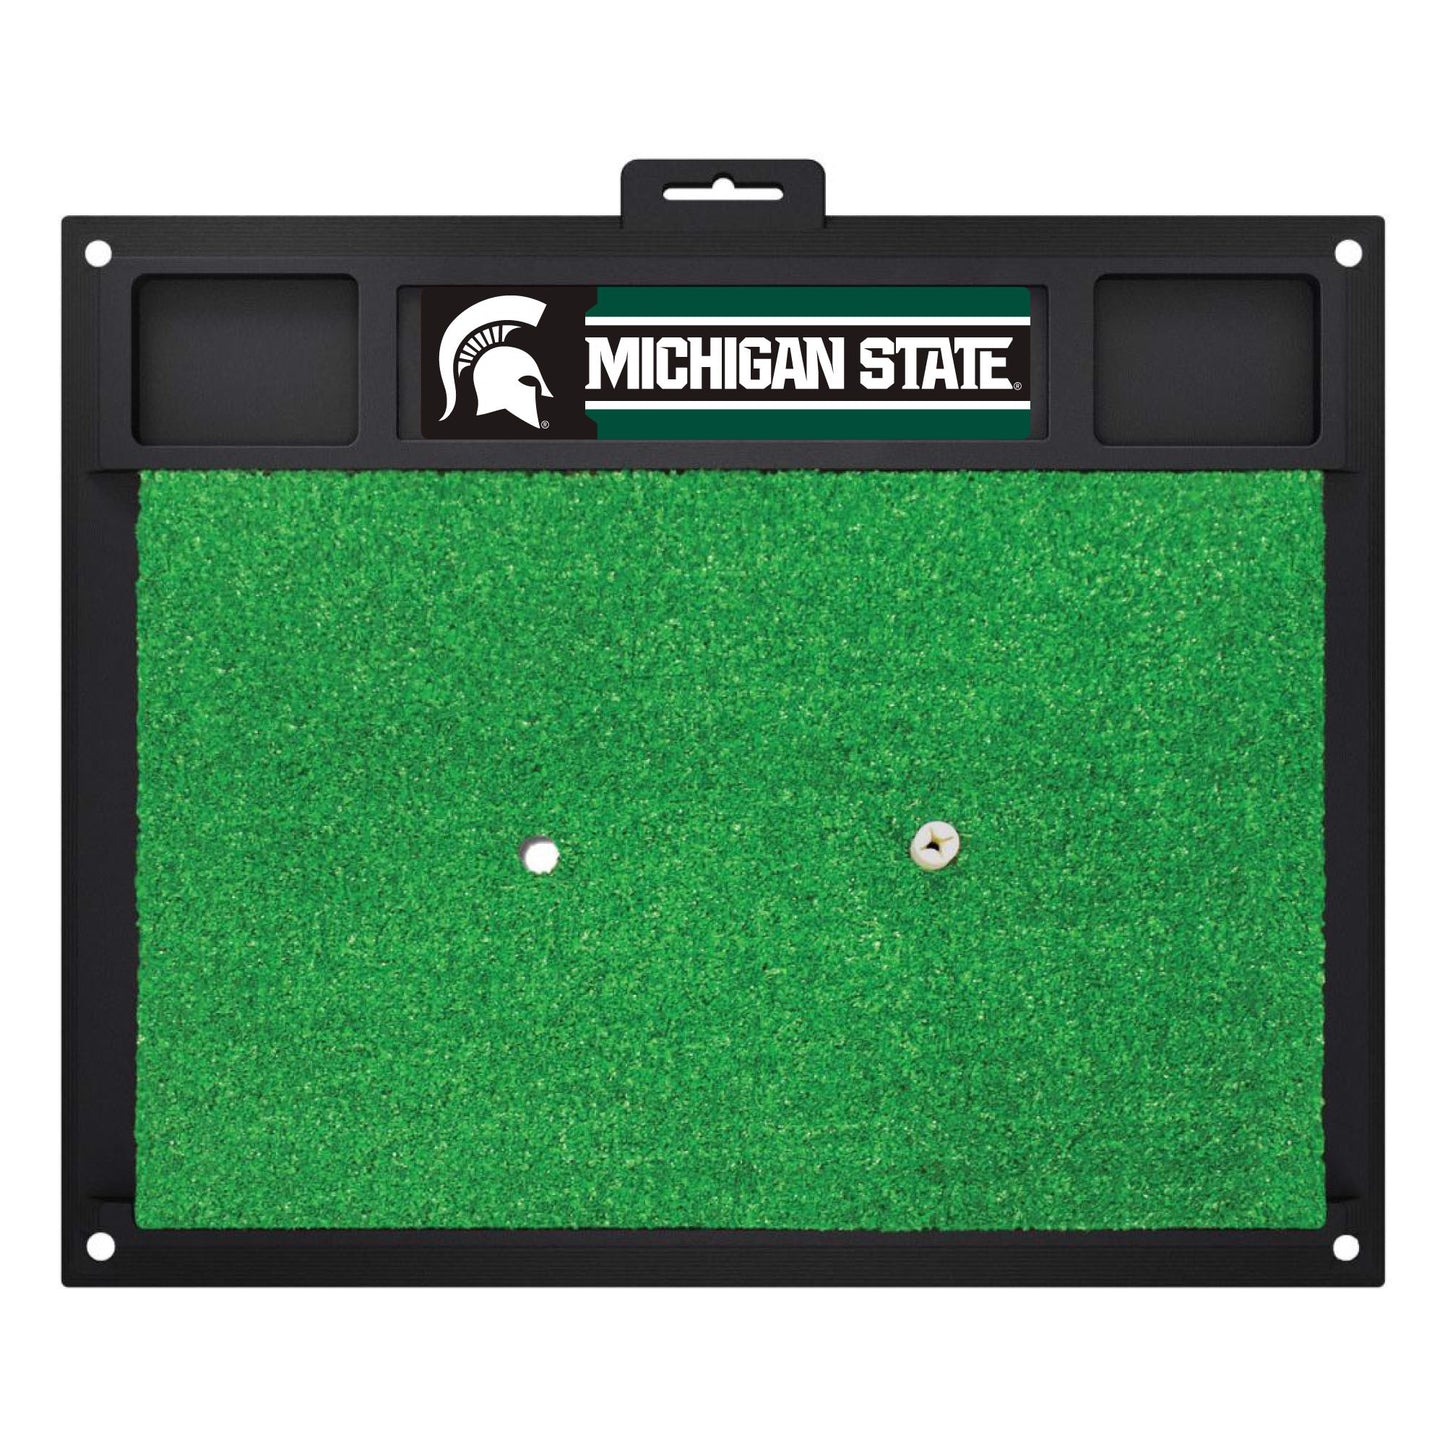 Michigan State Spartans Golf Hitting Mat by Fanmats